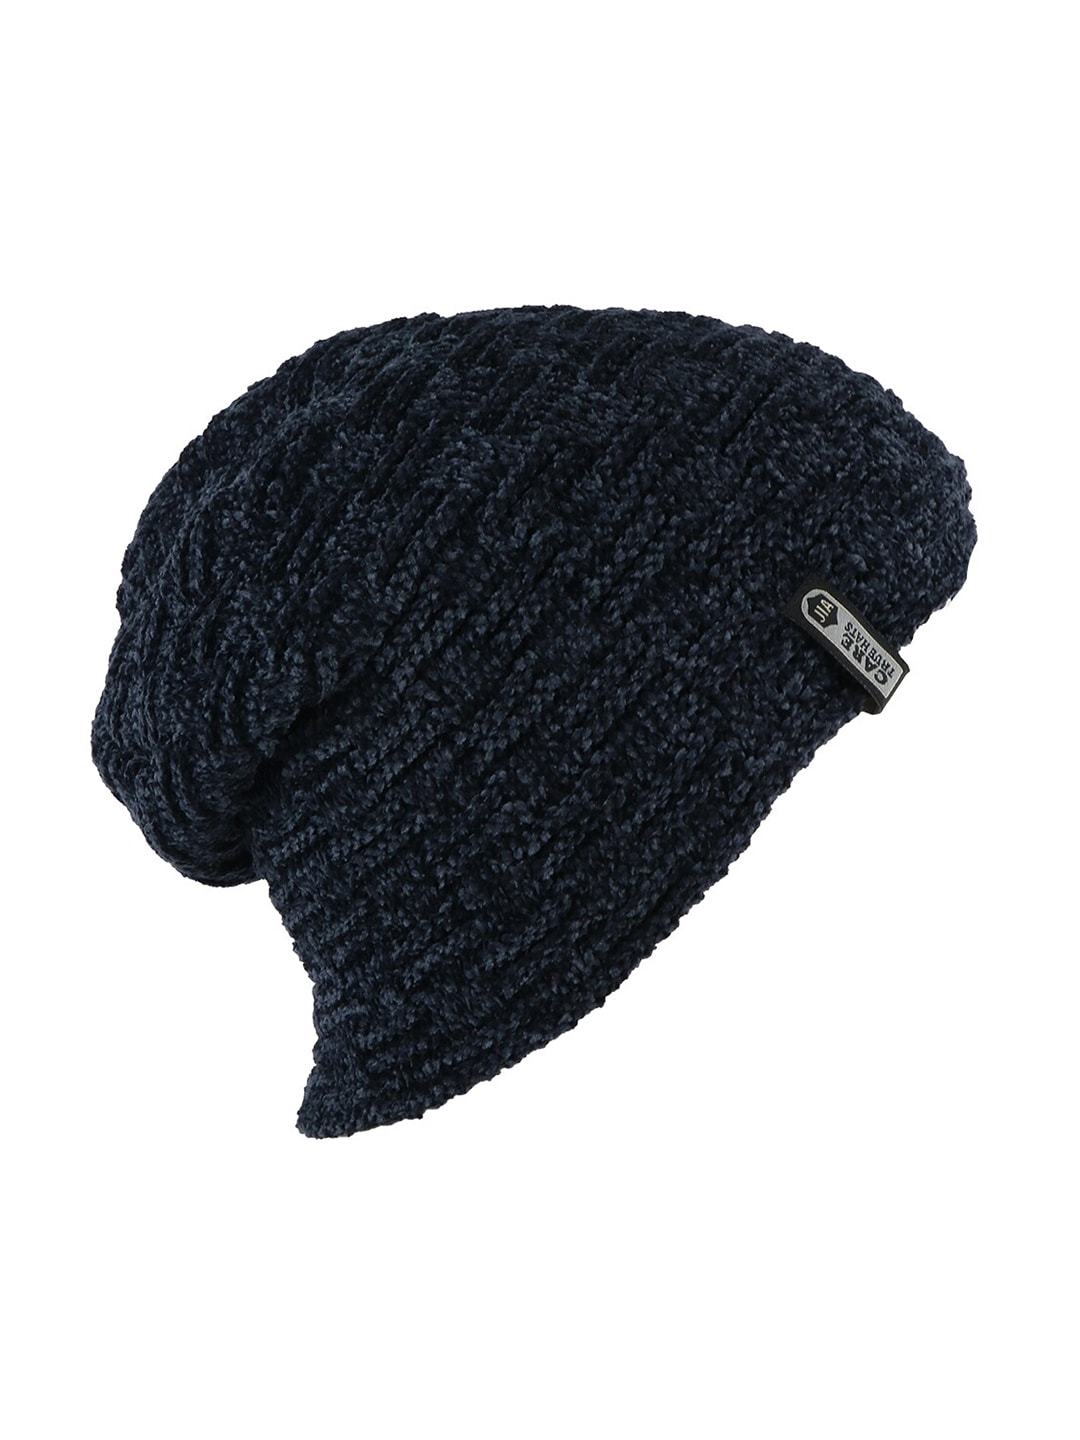 iSWEVEN Unisex Set of 2 Navy Blue & Black Beanie Price in India